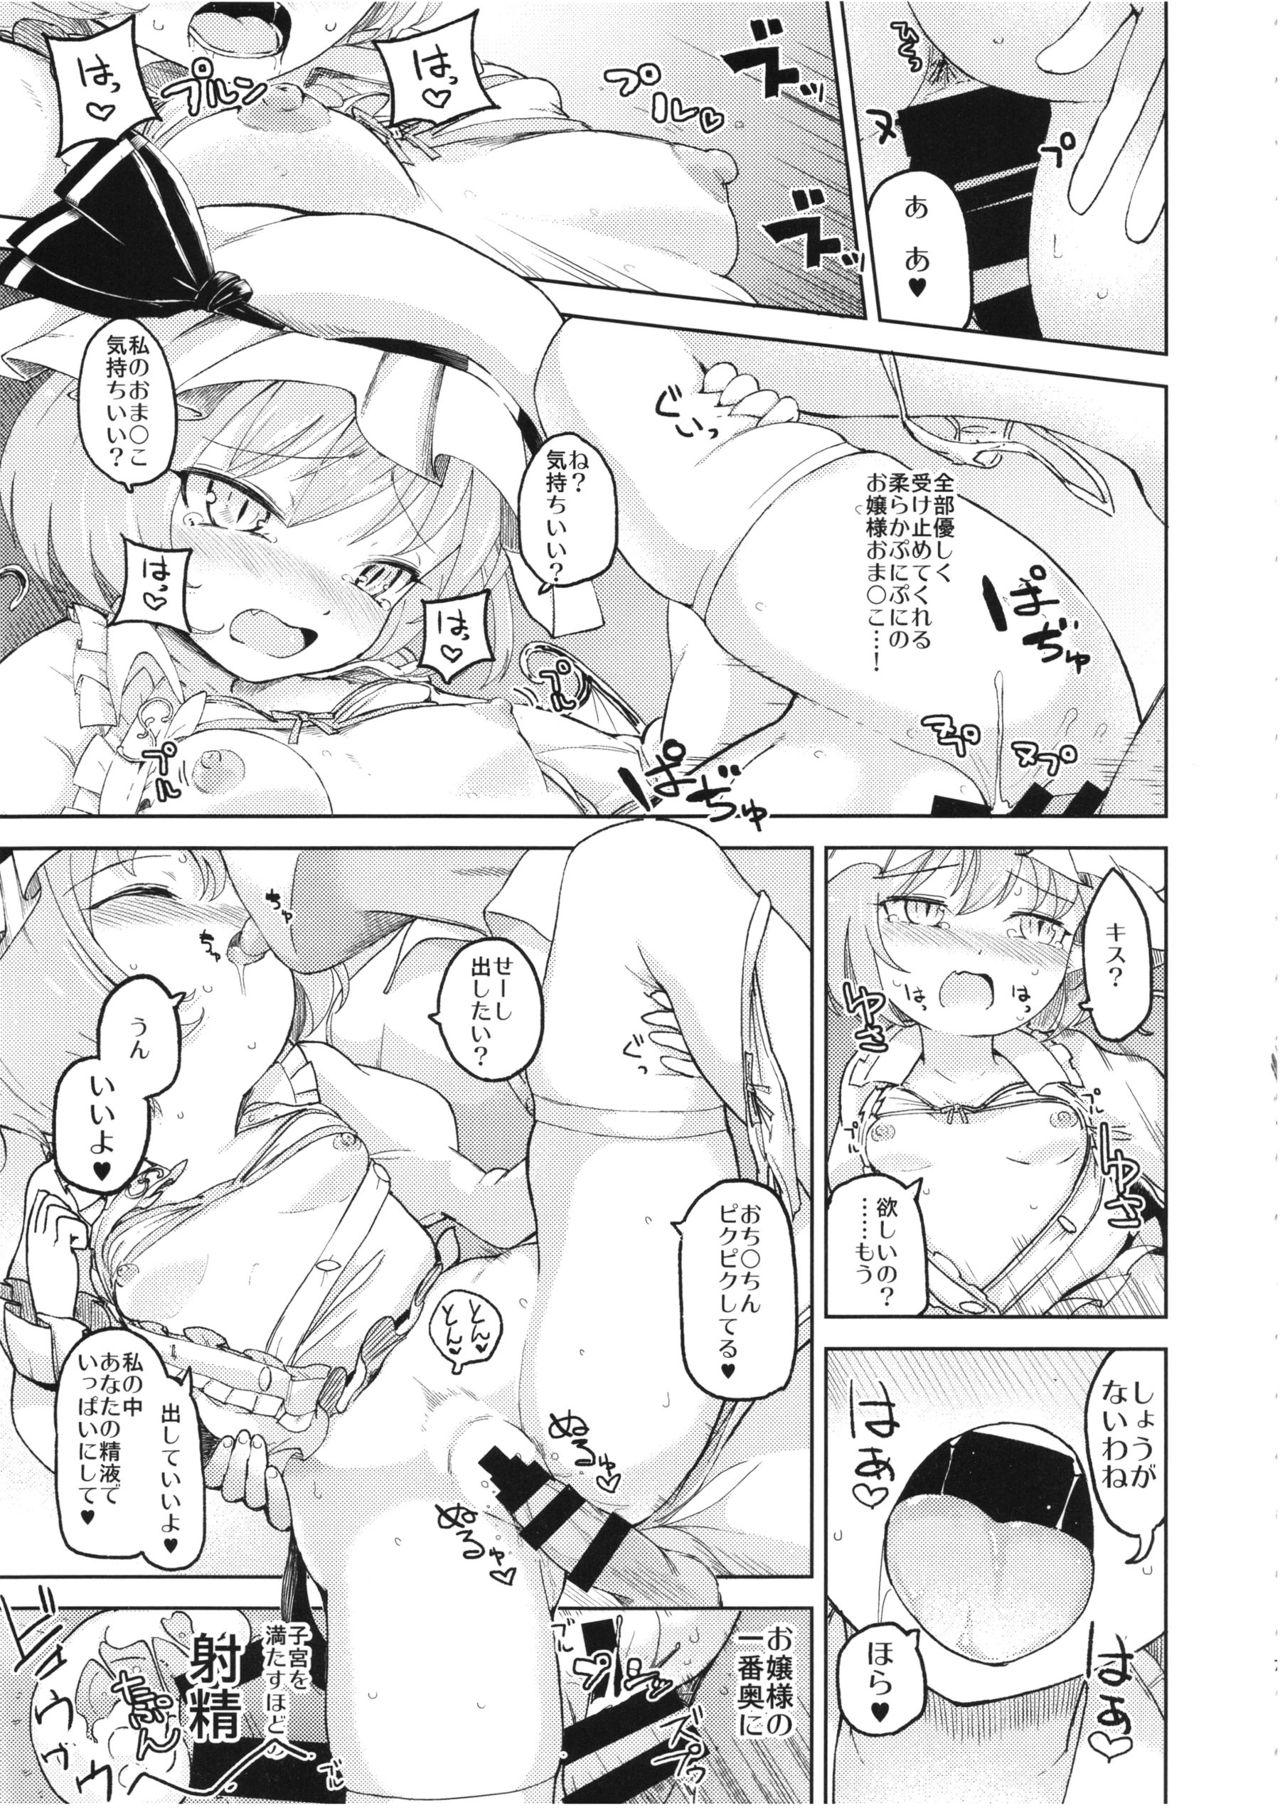 Threeway Aisare Scarlet - Touhou project Transex - Page 7